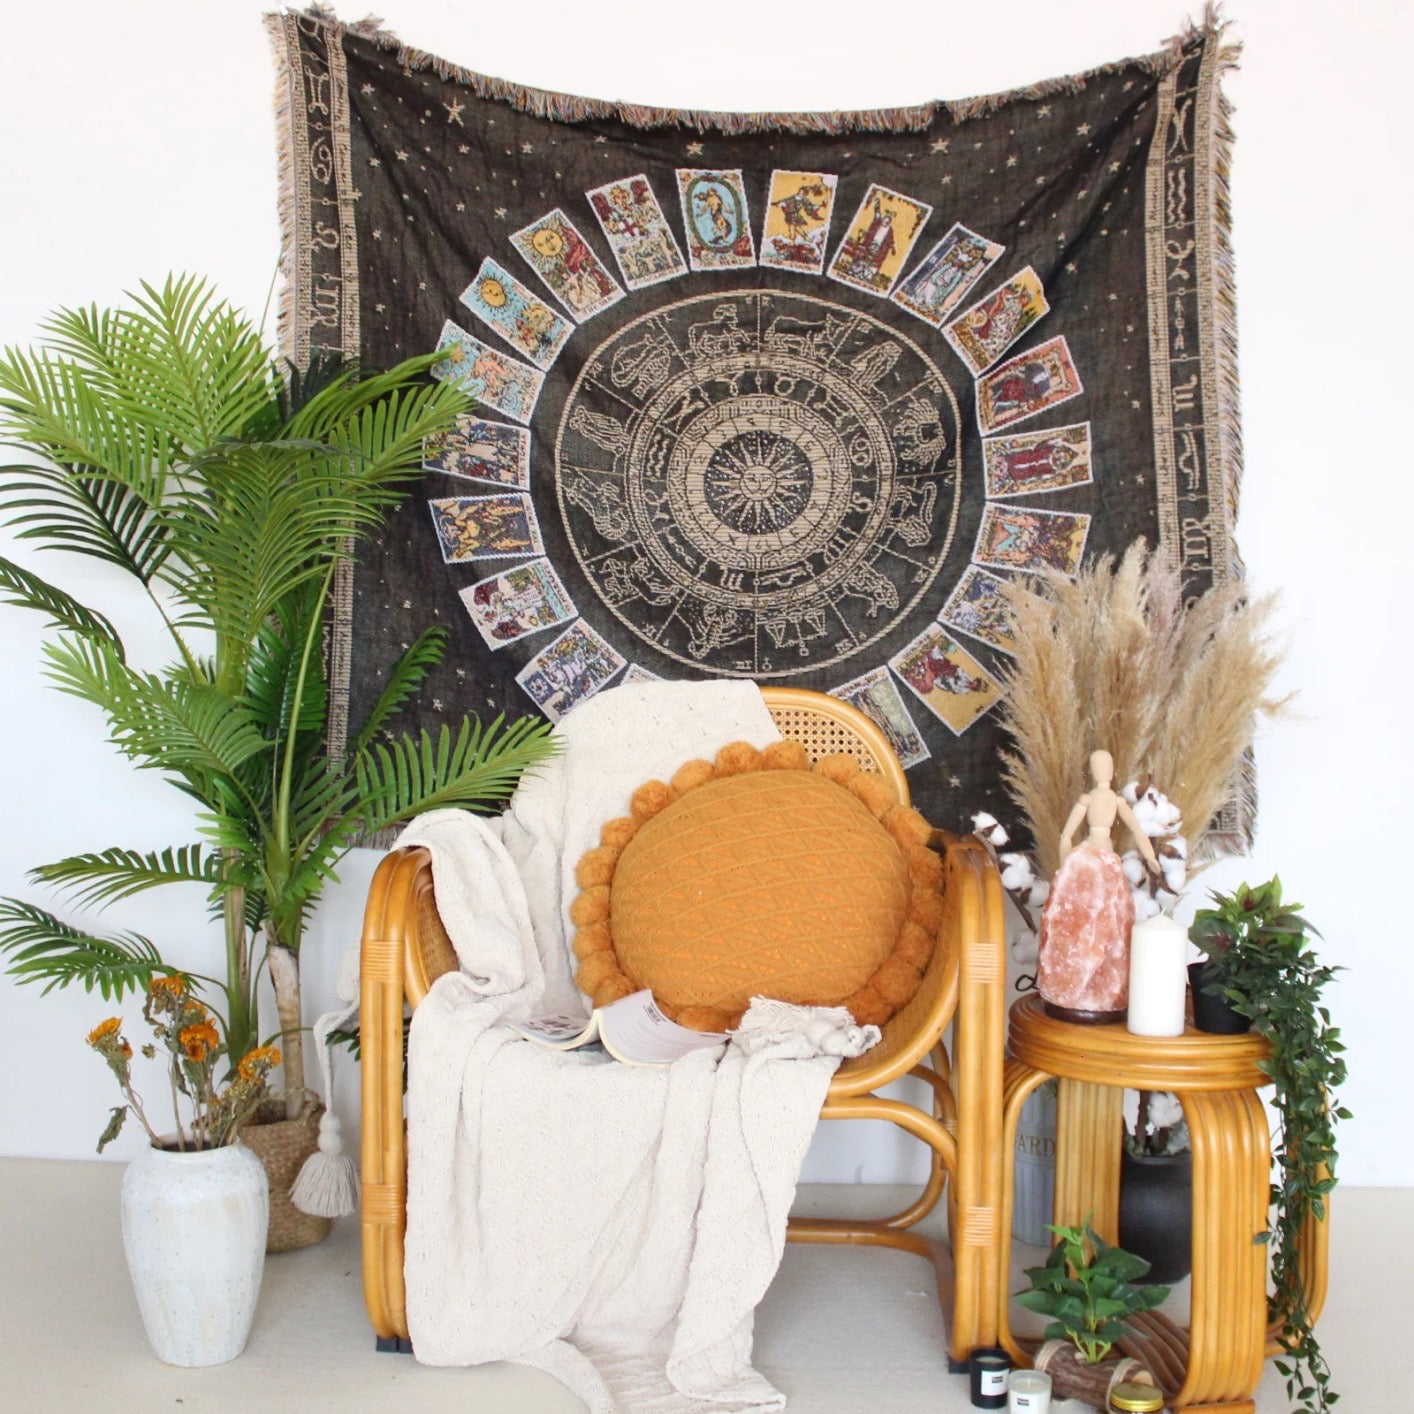 Black color with tarot cards decorative tapestries  boho blanket nz , boho throw nz  Ideal for home decor, yoga, picnics, beach and campervan  Large boho tapestry with tassels, hippie boho wall tapestry bohemian woven tapestry, boho bed throw